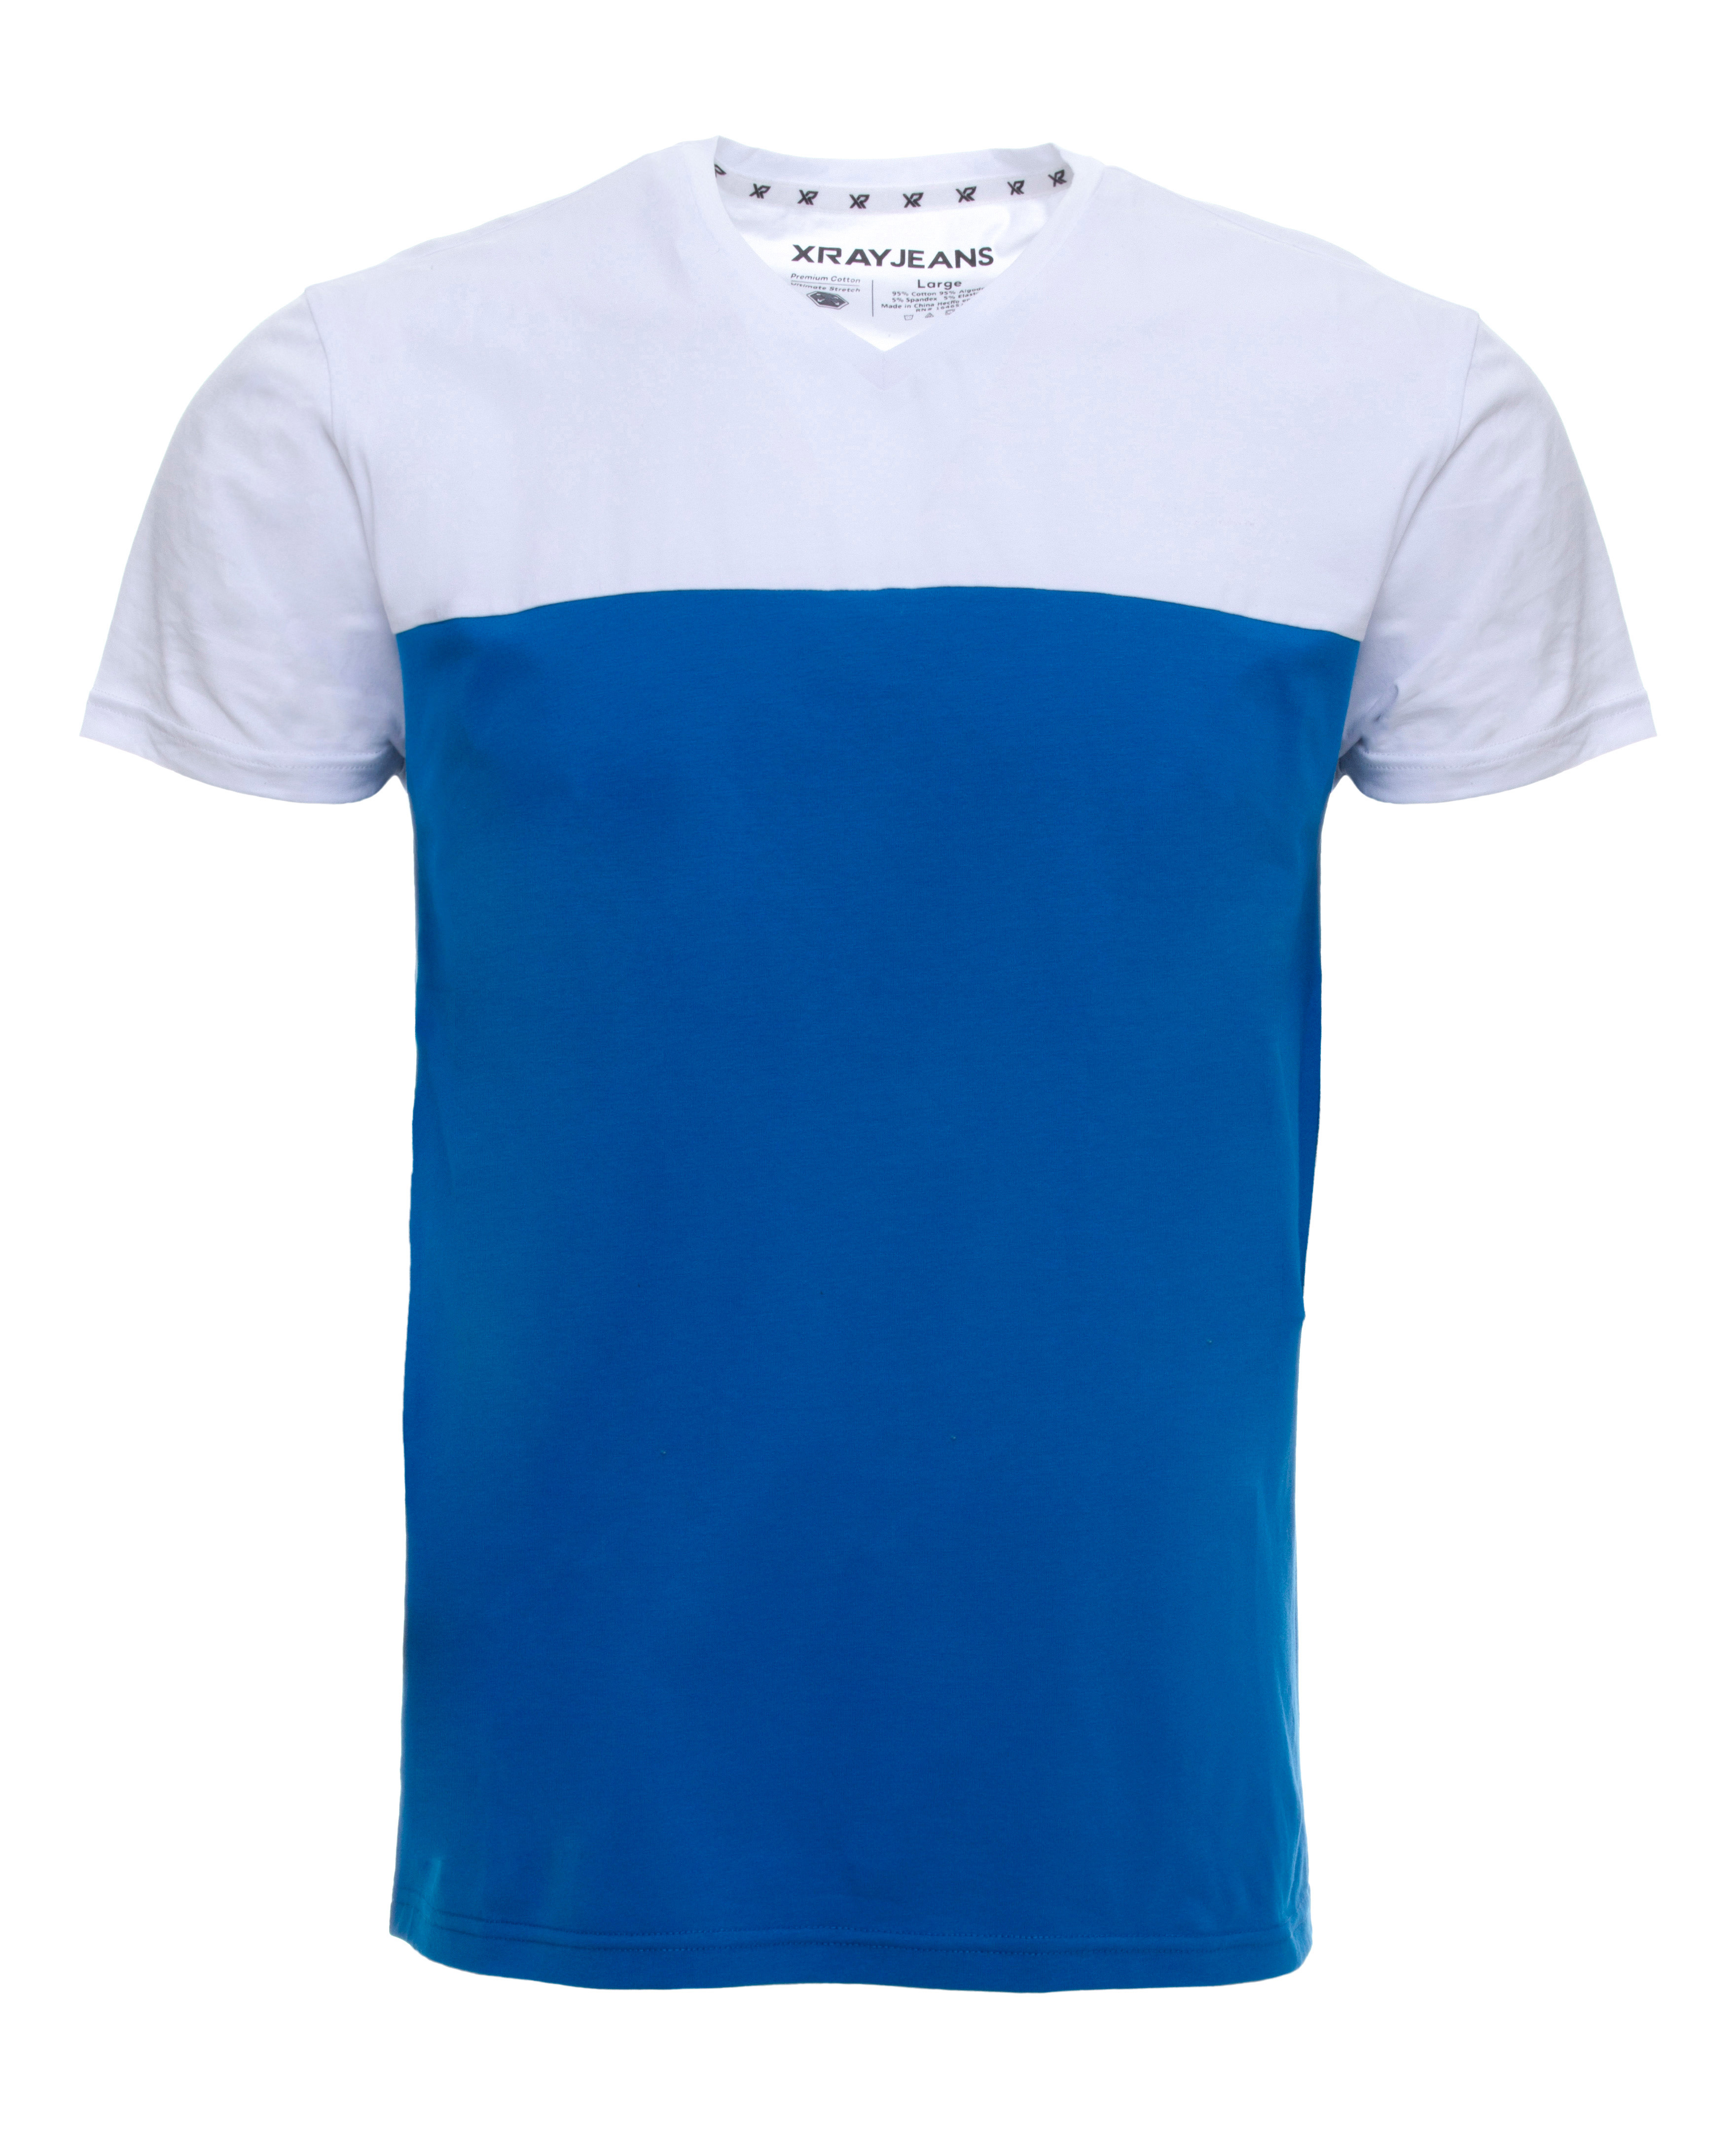 X RAY Men's Soft Stretch Cotton Solid Colorblock Short Sleeve V-Neck Slim Fit T-Shirt, Fashion Sport Casual Tee for Men, Ocean Blue/White Size X-Large - image 1 of 4